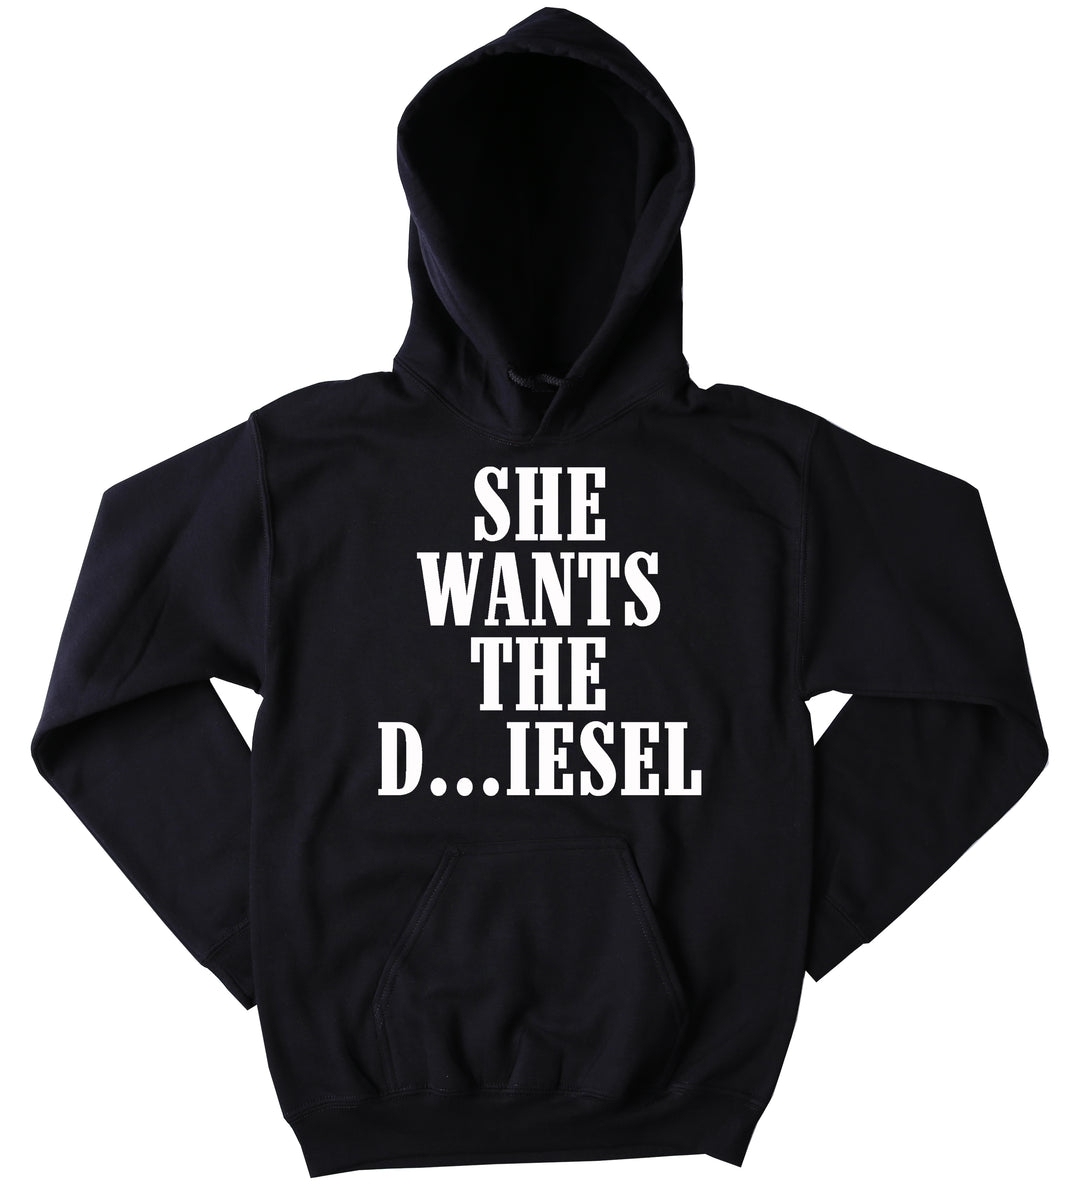 Funny Redneck Sweatshirt She Wants the D...iesel Slogan Southern Count pic